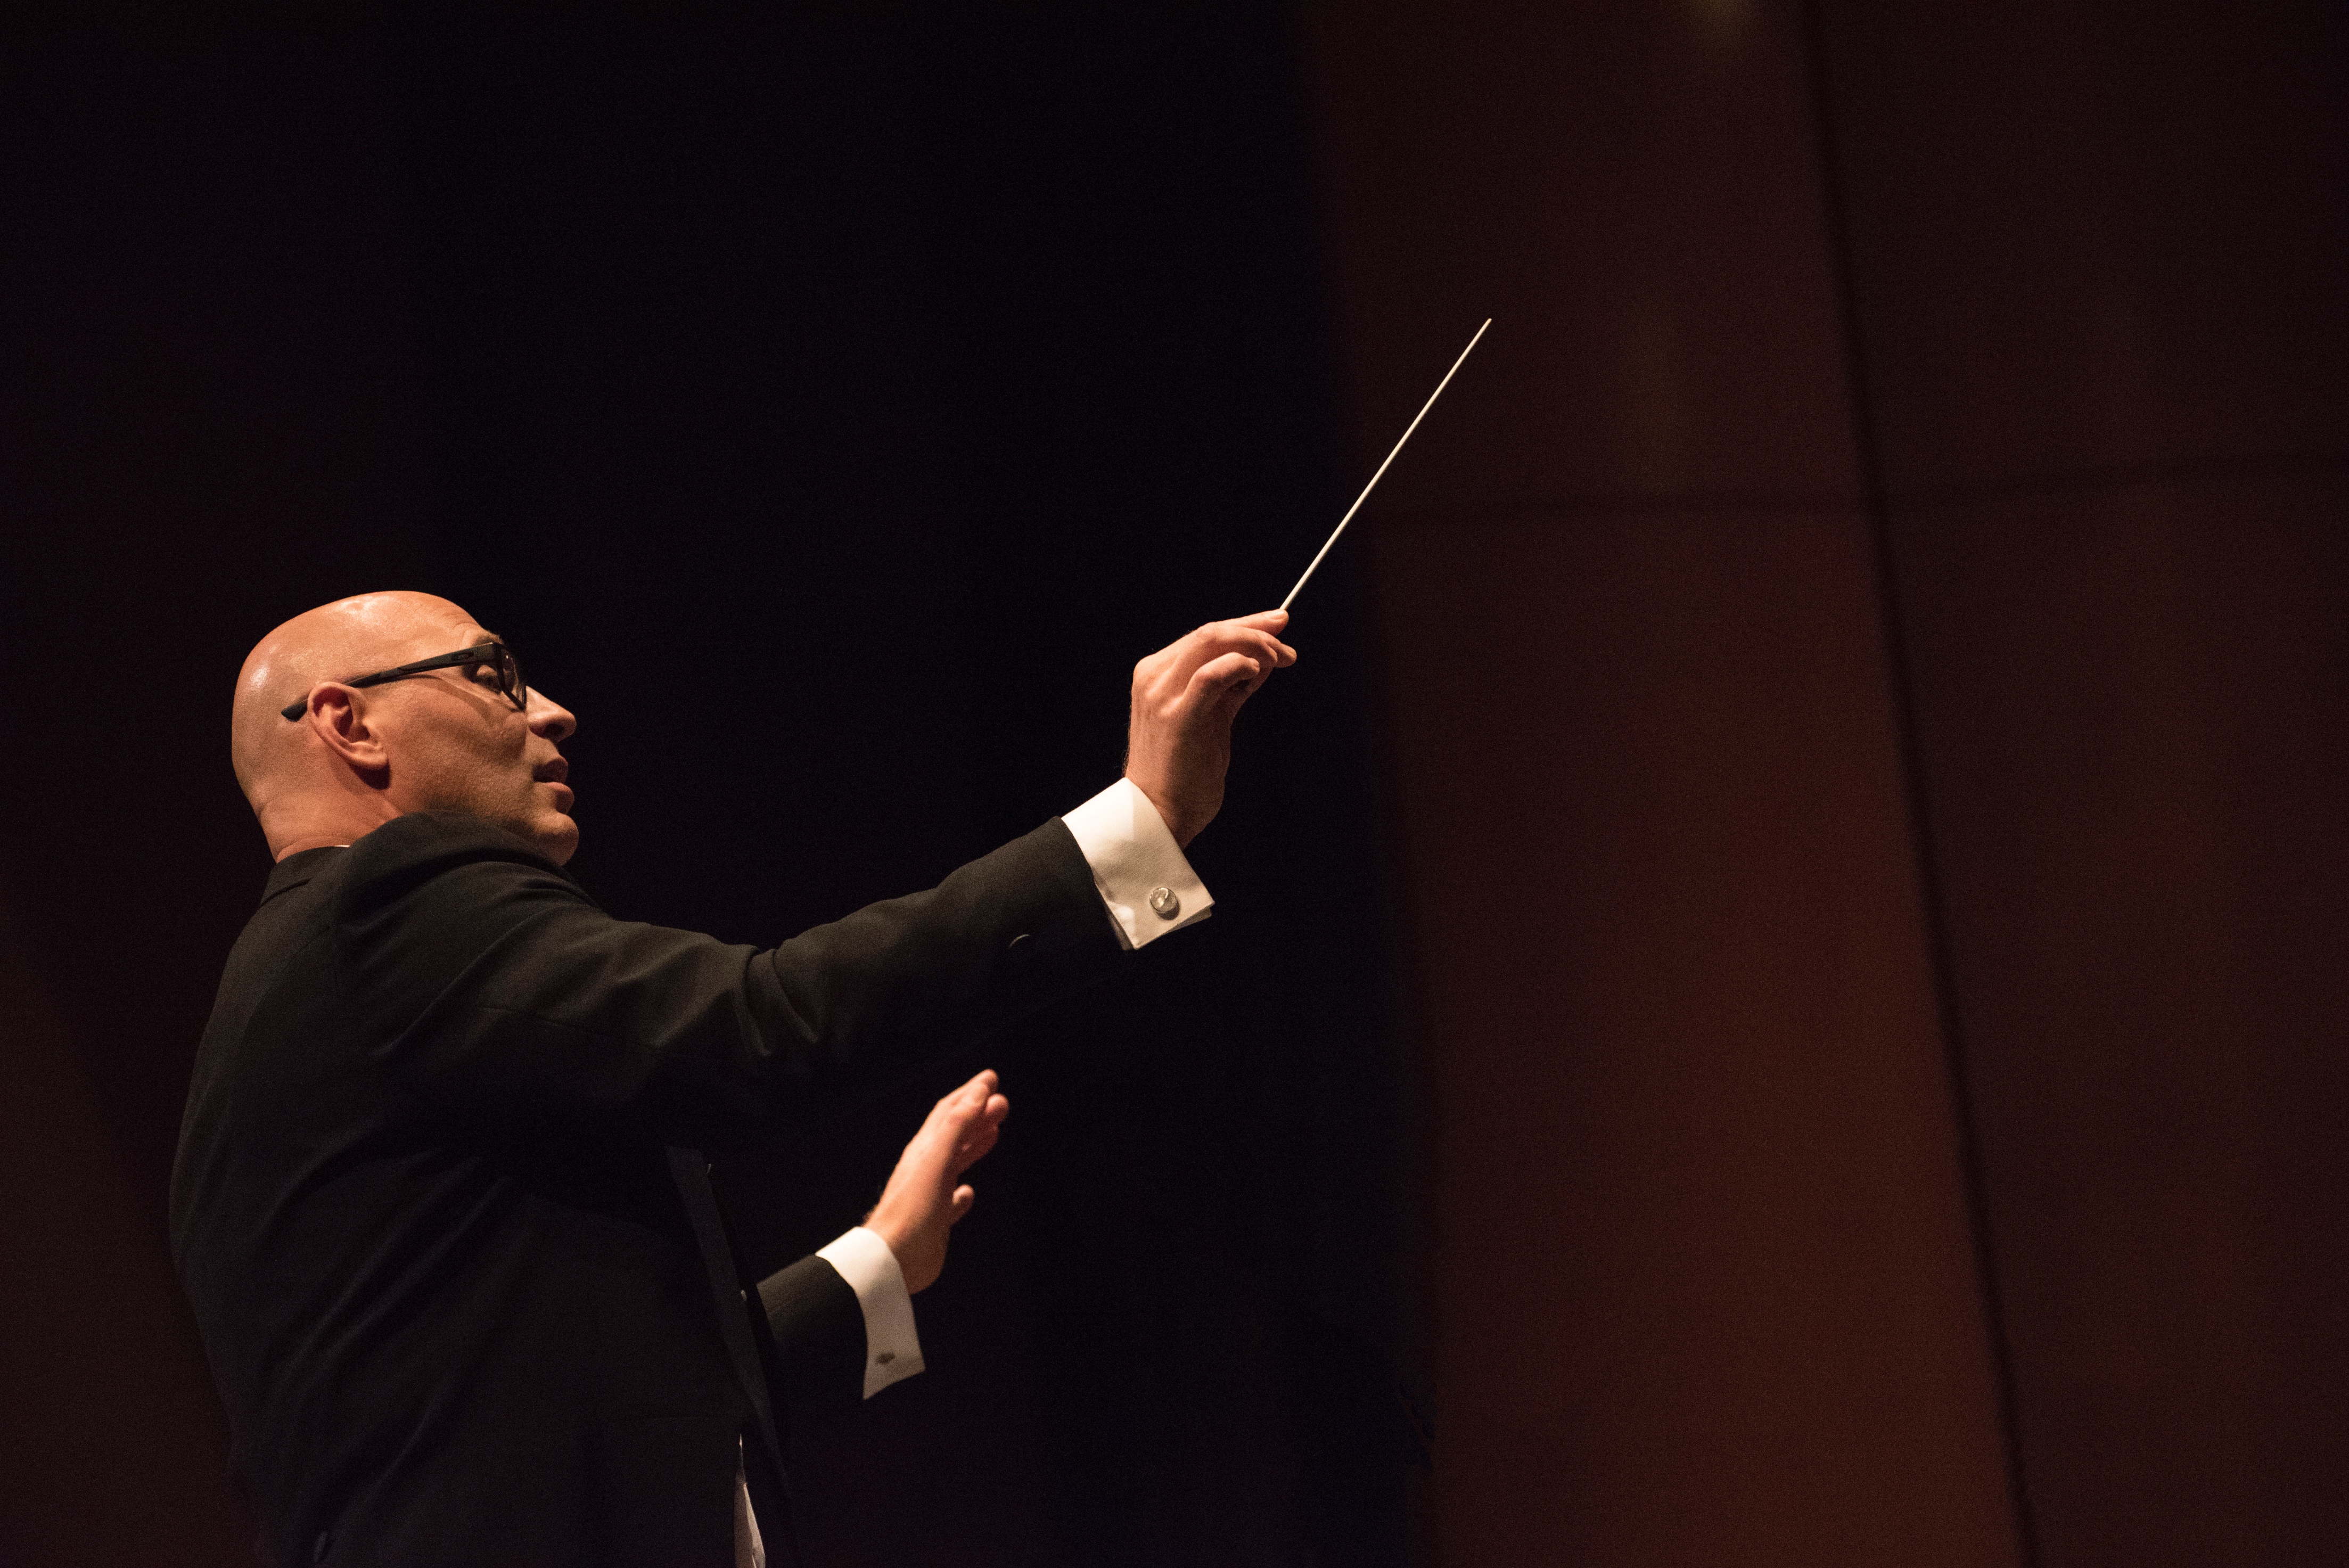 Concert Choir Director Cook to Present Lecture at San Jose State’s Beethoven Center